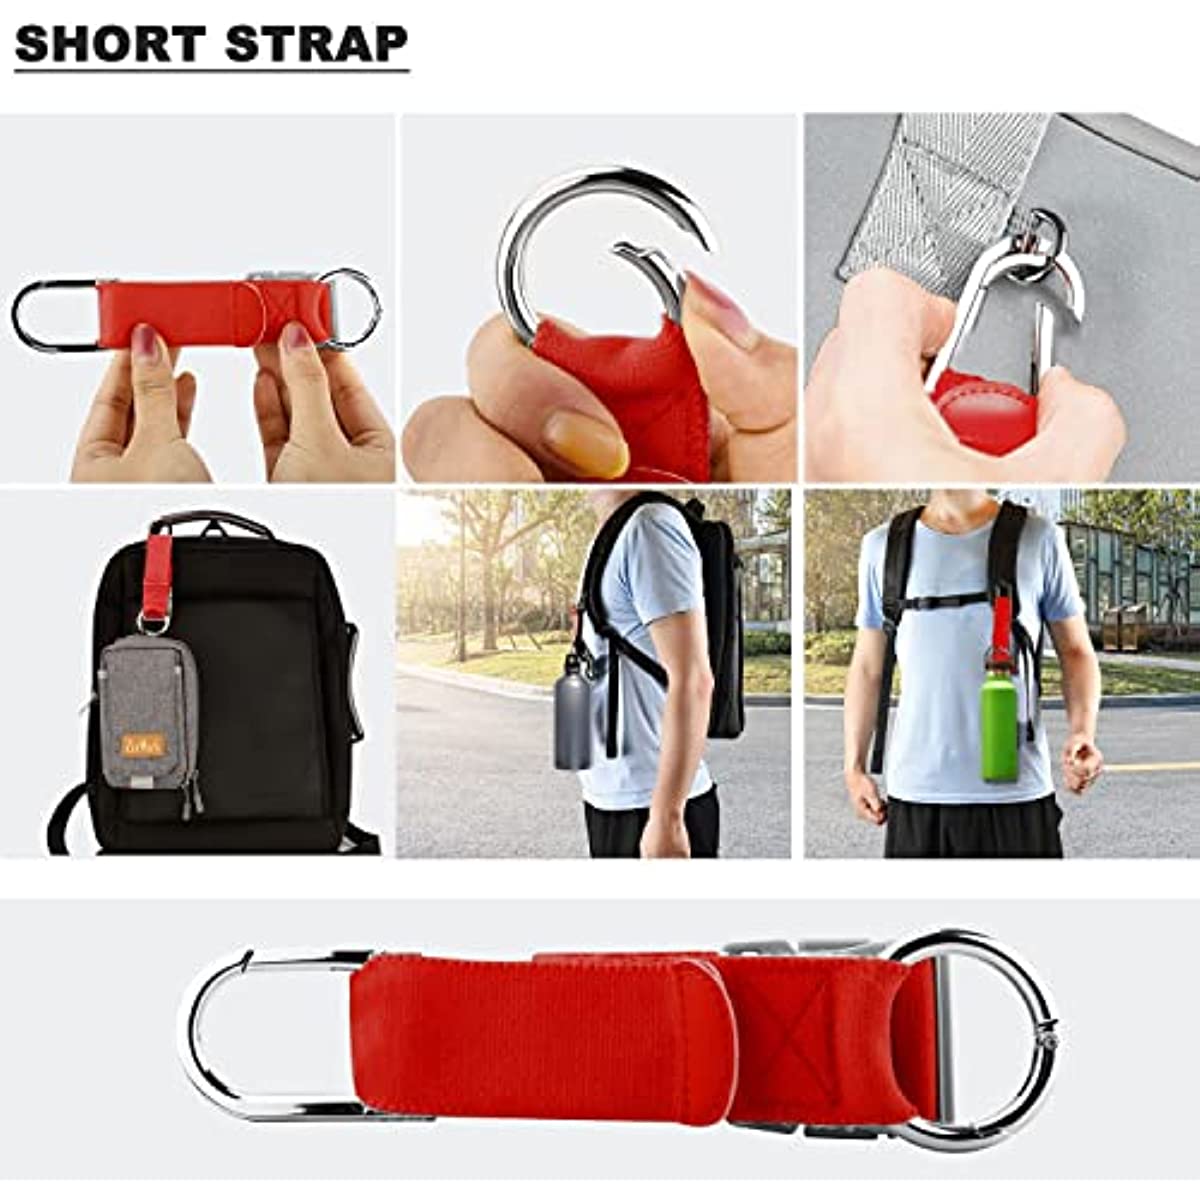 Add A Bag Luggage Strap Jacket Gripper, ZINZ D-Ring Hook Baggage Suitcase Straps Belts Travel Accessories